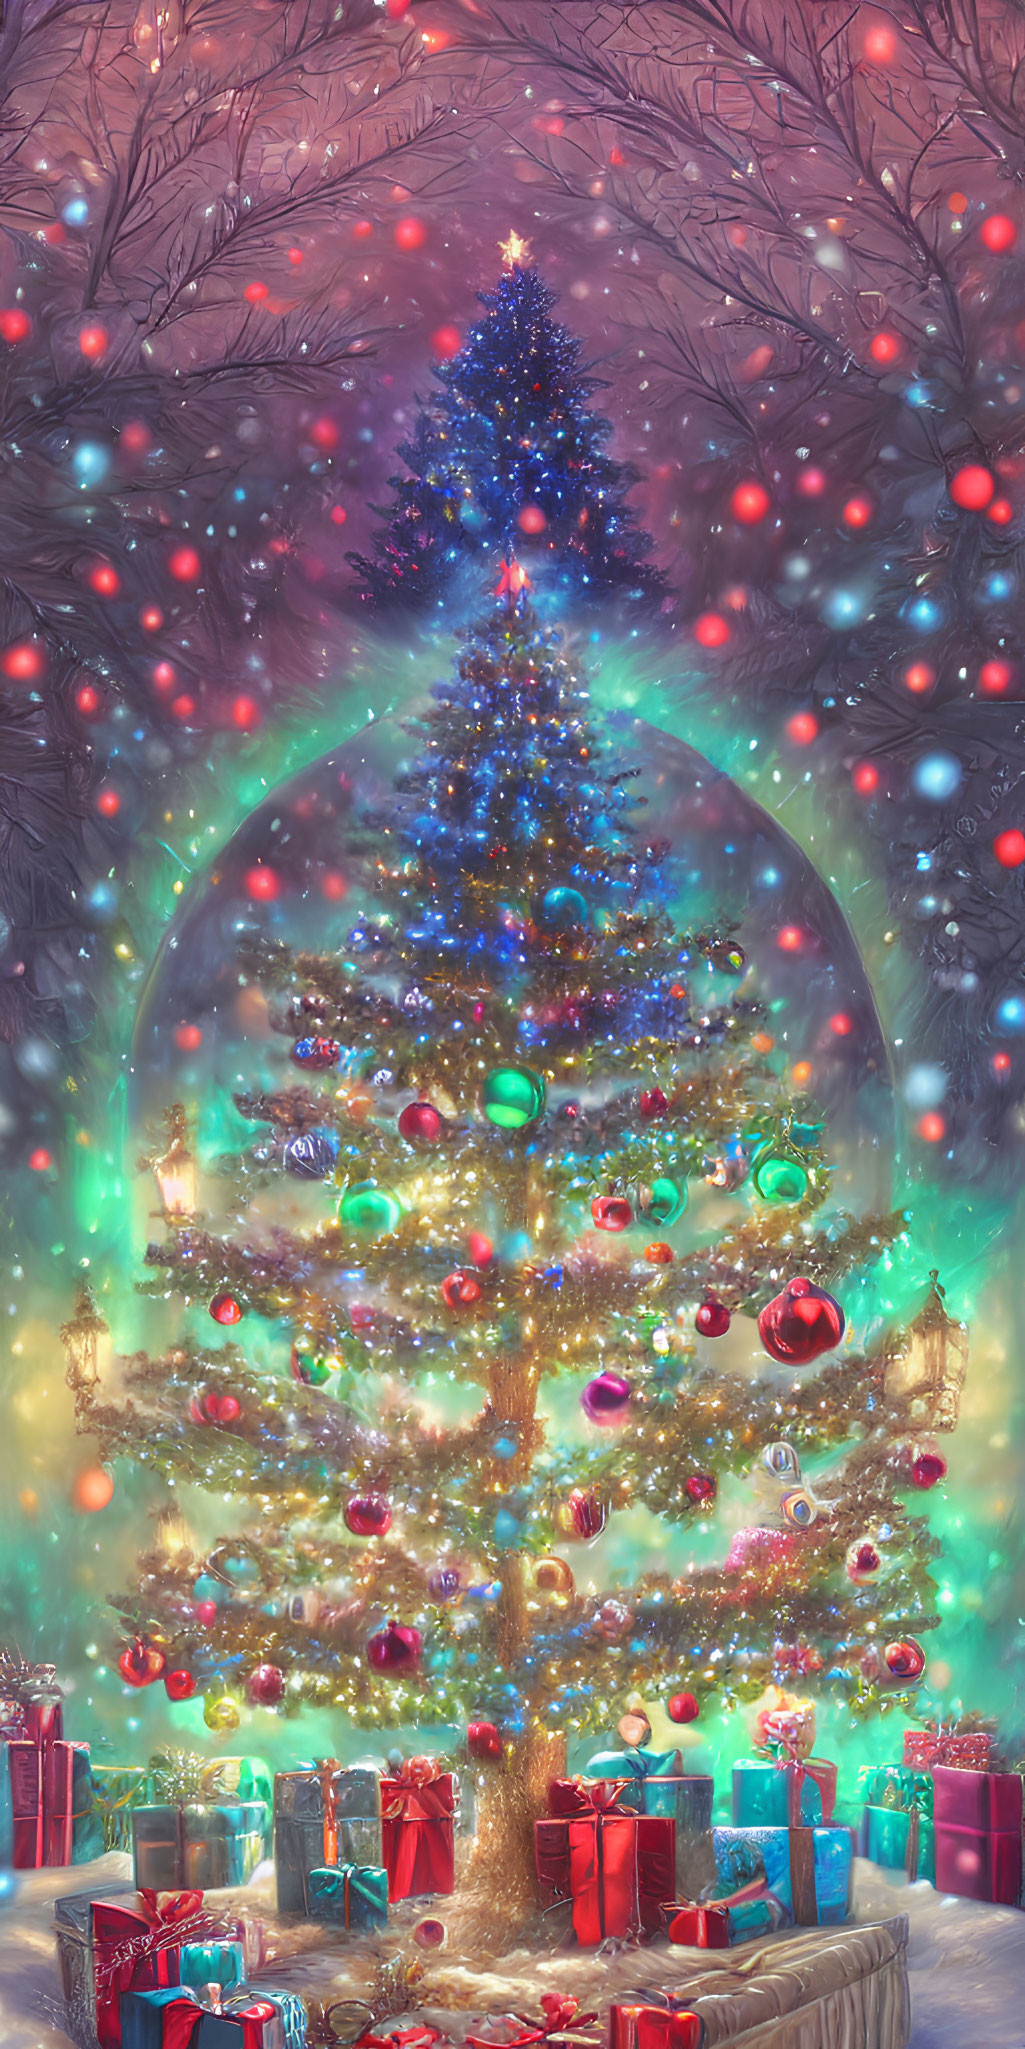 Vibrant Christmas tree with gifts, festive glow, and snowflake decorations